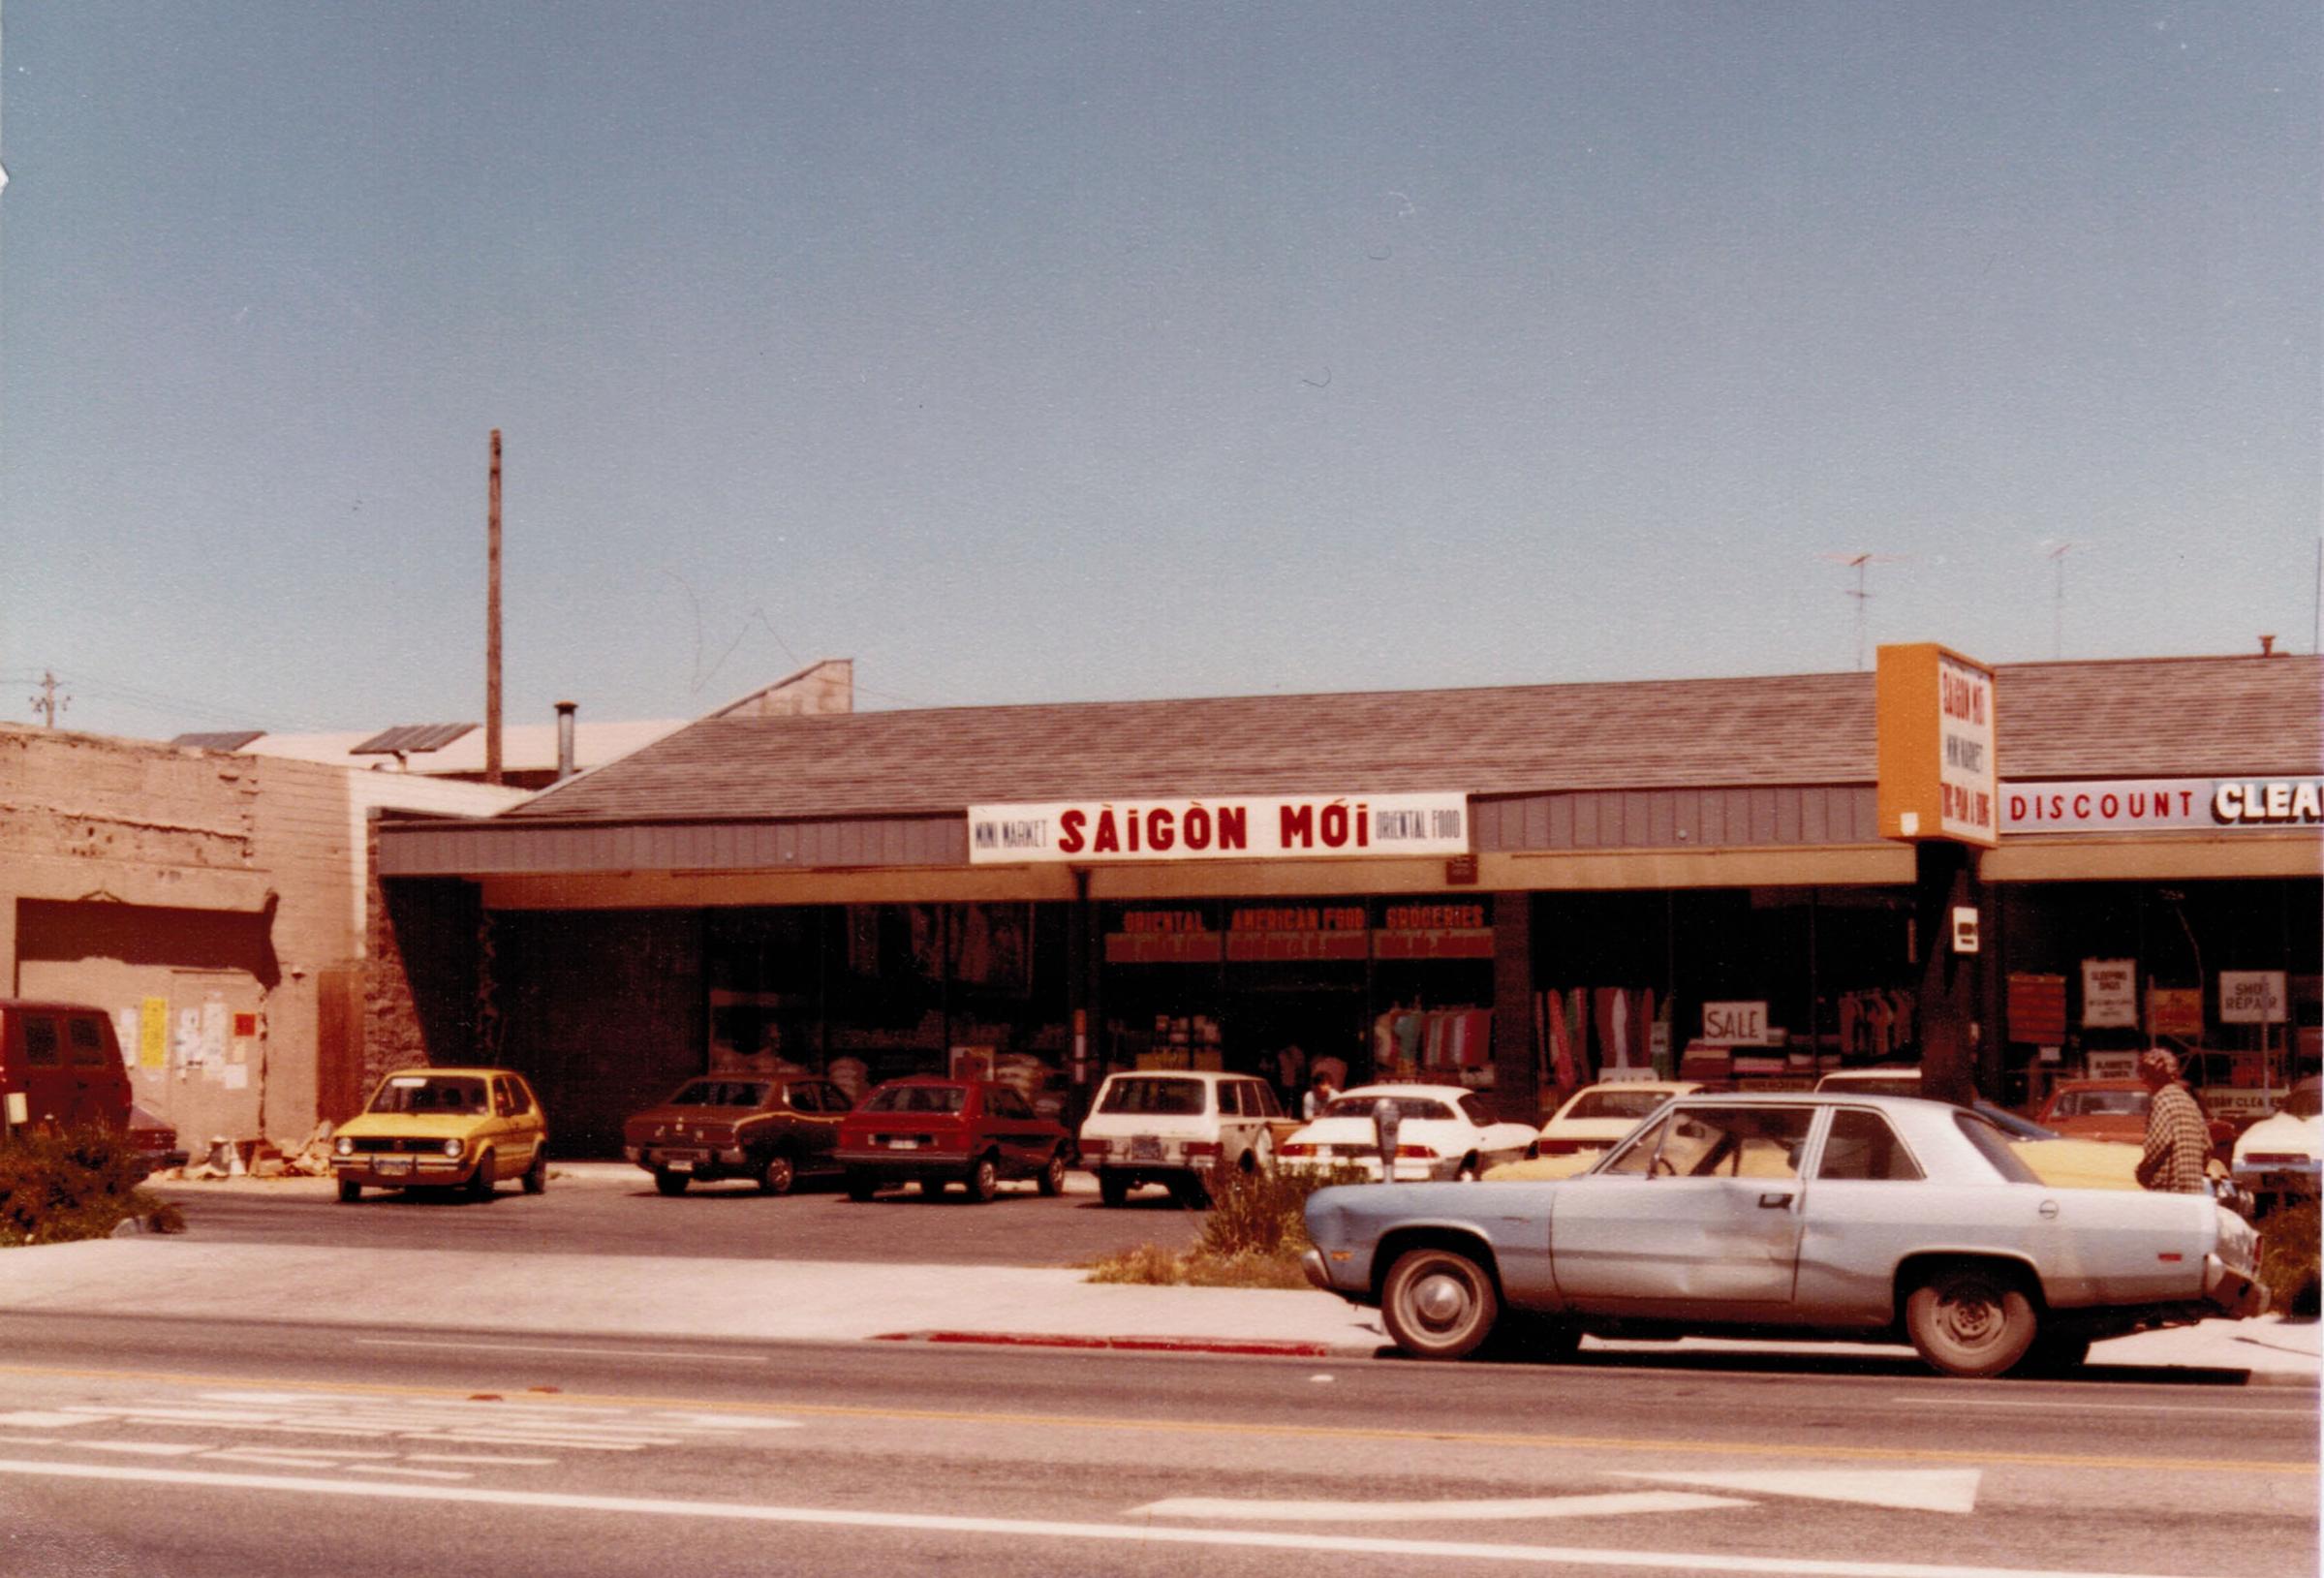 The Nguyen family, in the early 1980s in San Jose, Calif., where his parents owned the New Saigon Mini Market